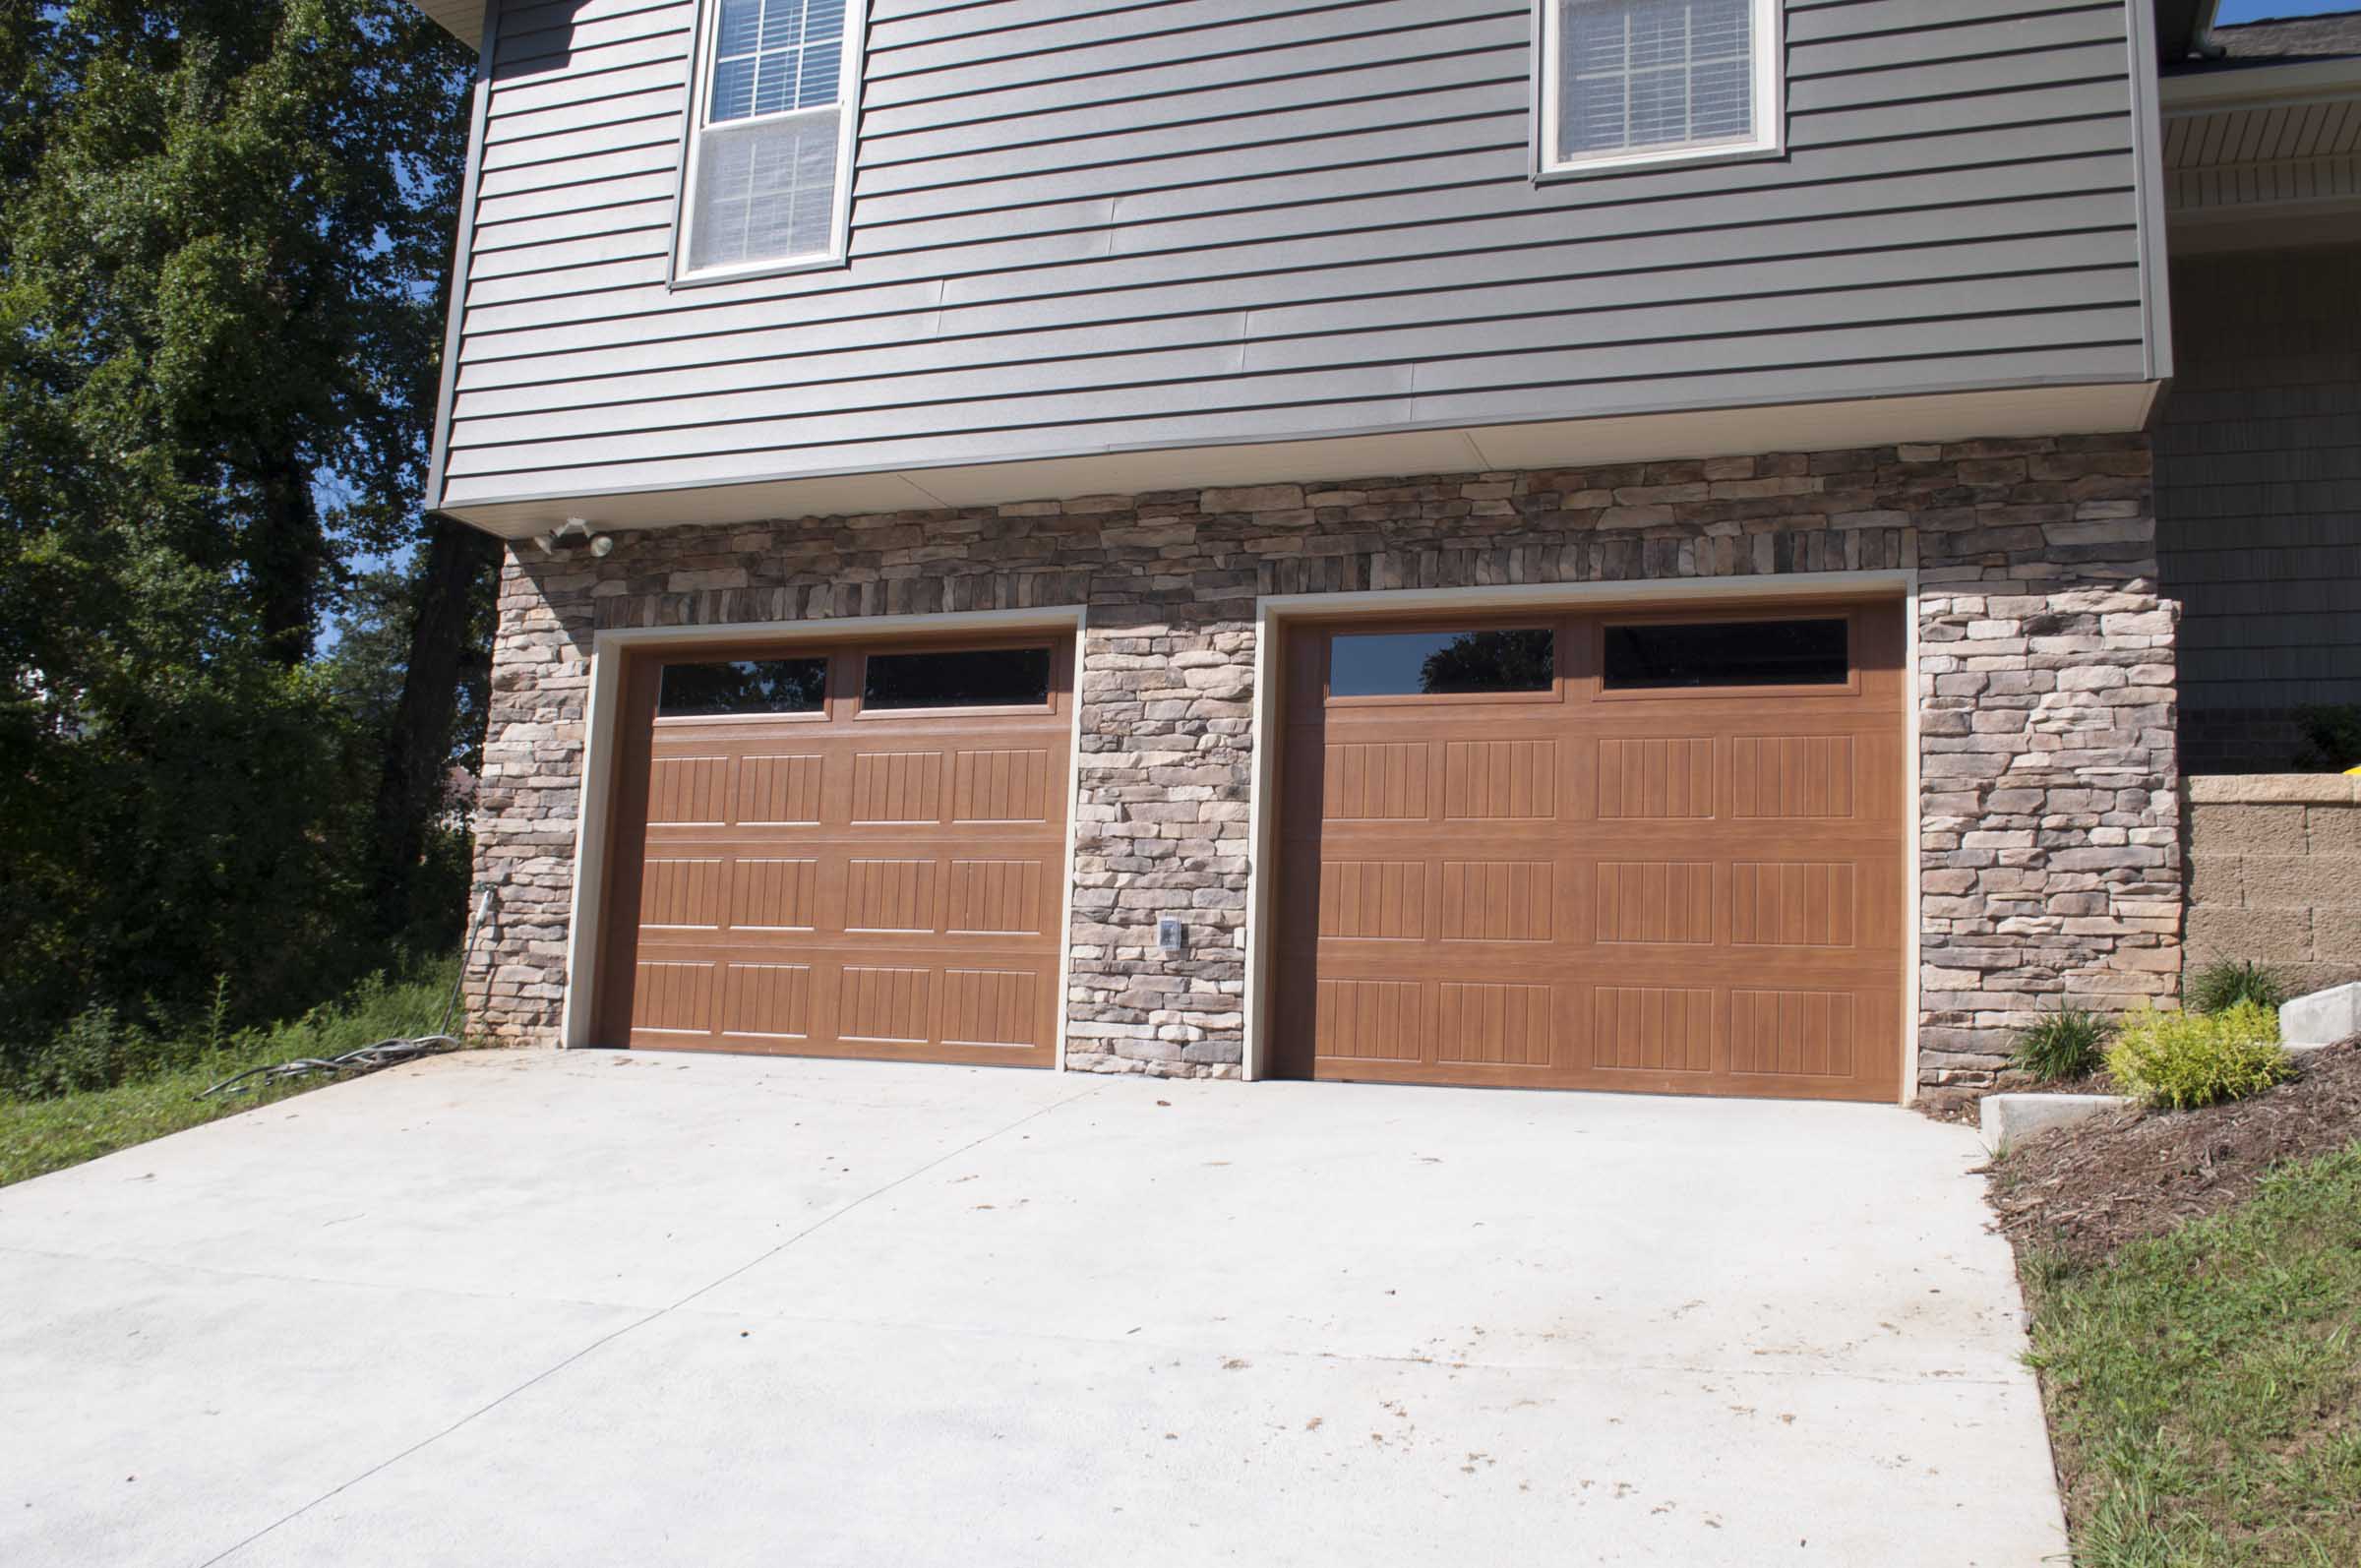 Knoxville Garage Door - Residential Thermacore® Insulated Garage Doors Project with Photos